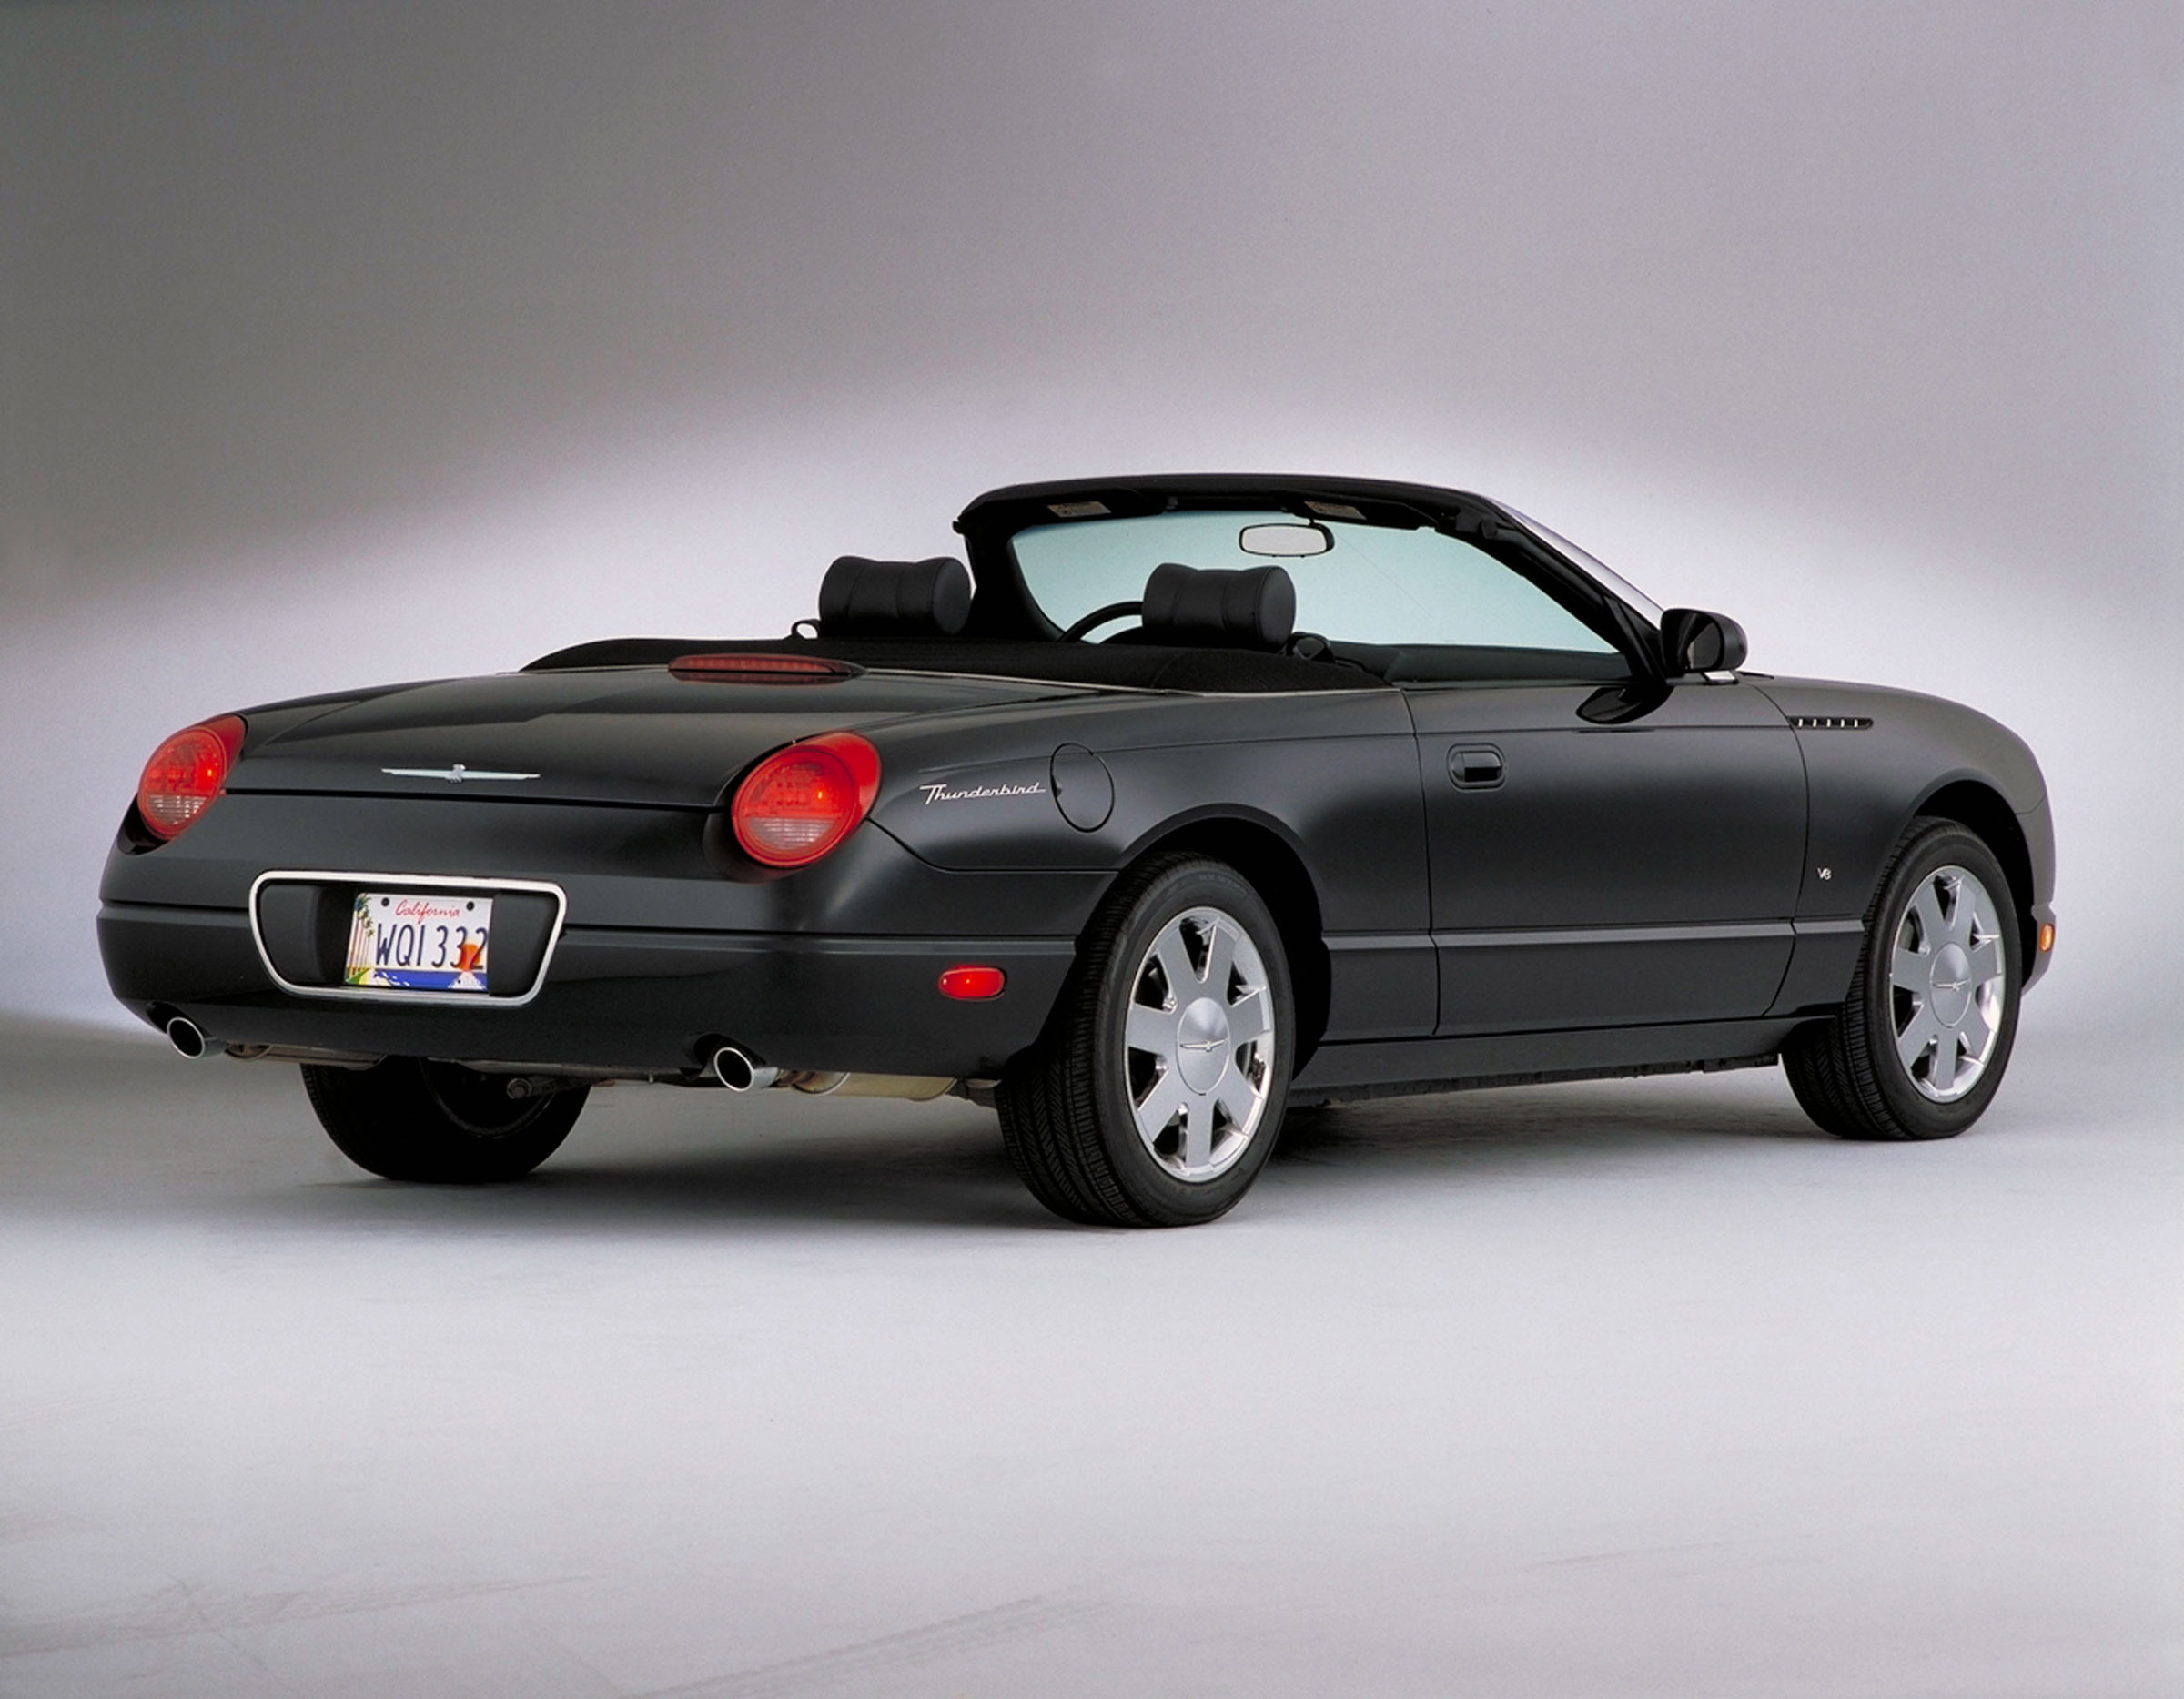 2003 Ford thunderbird performance review #1